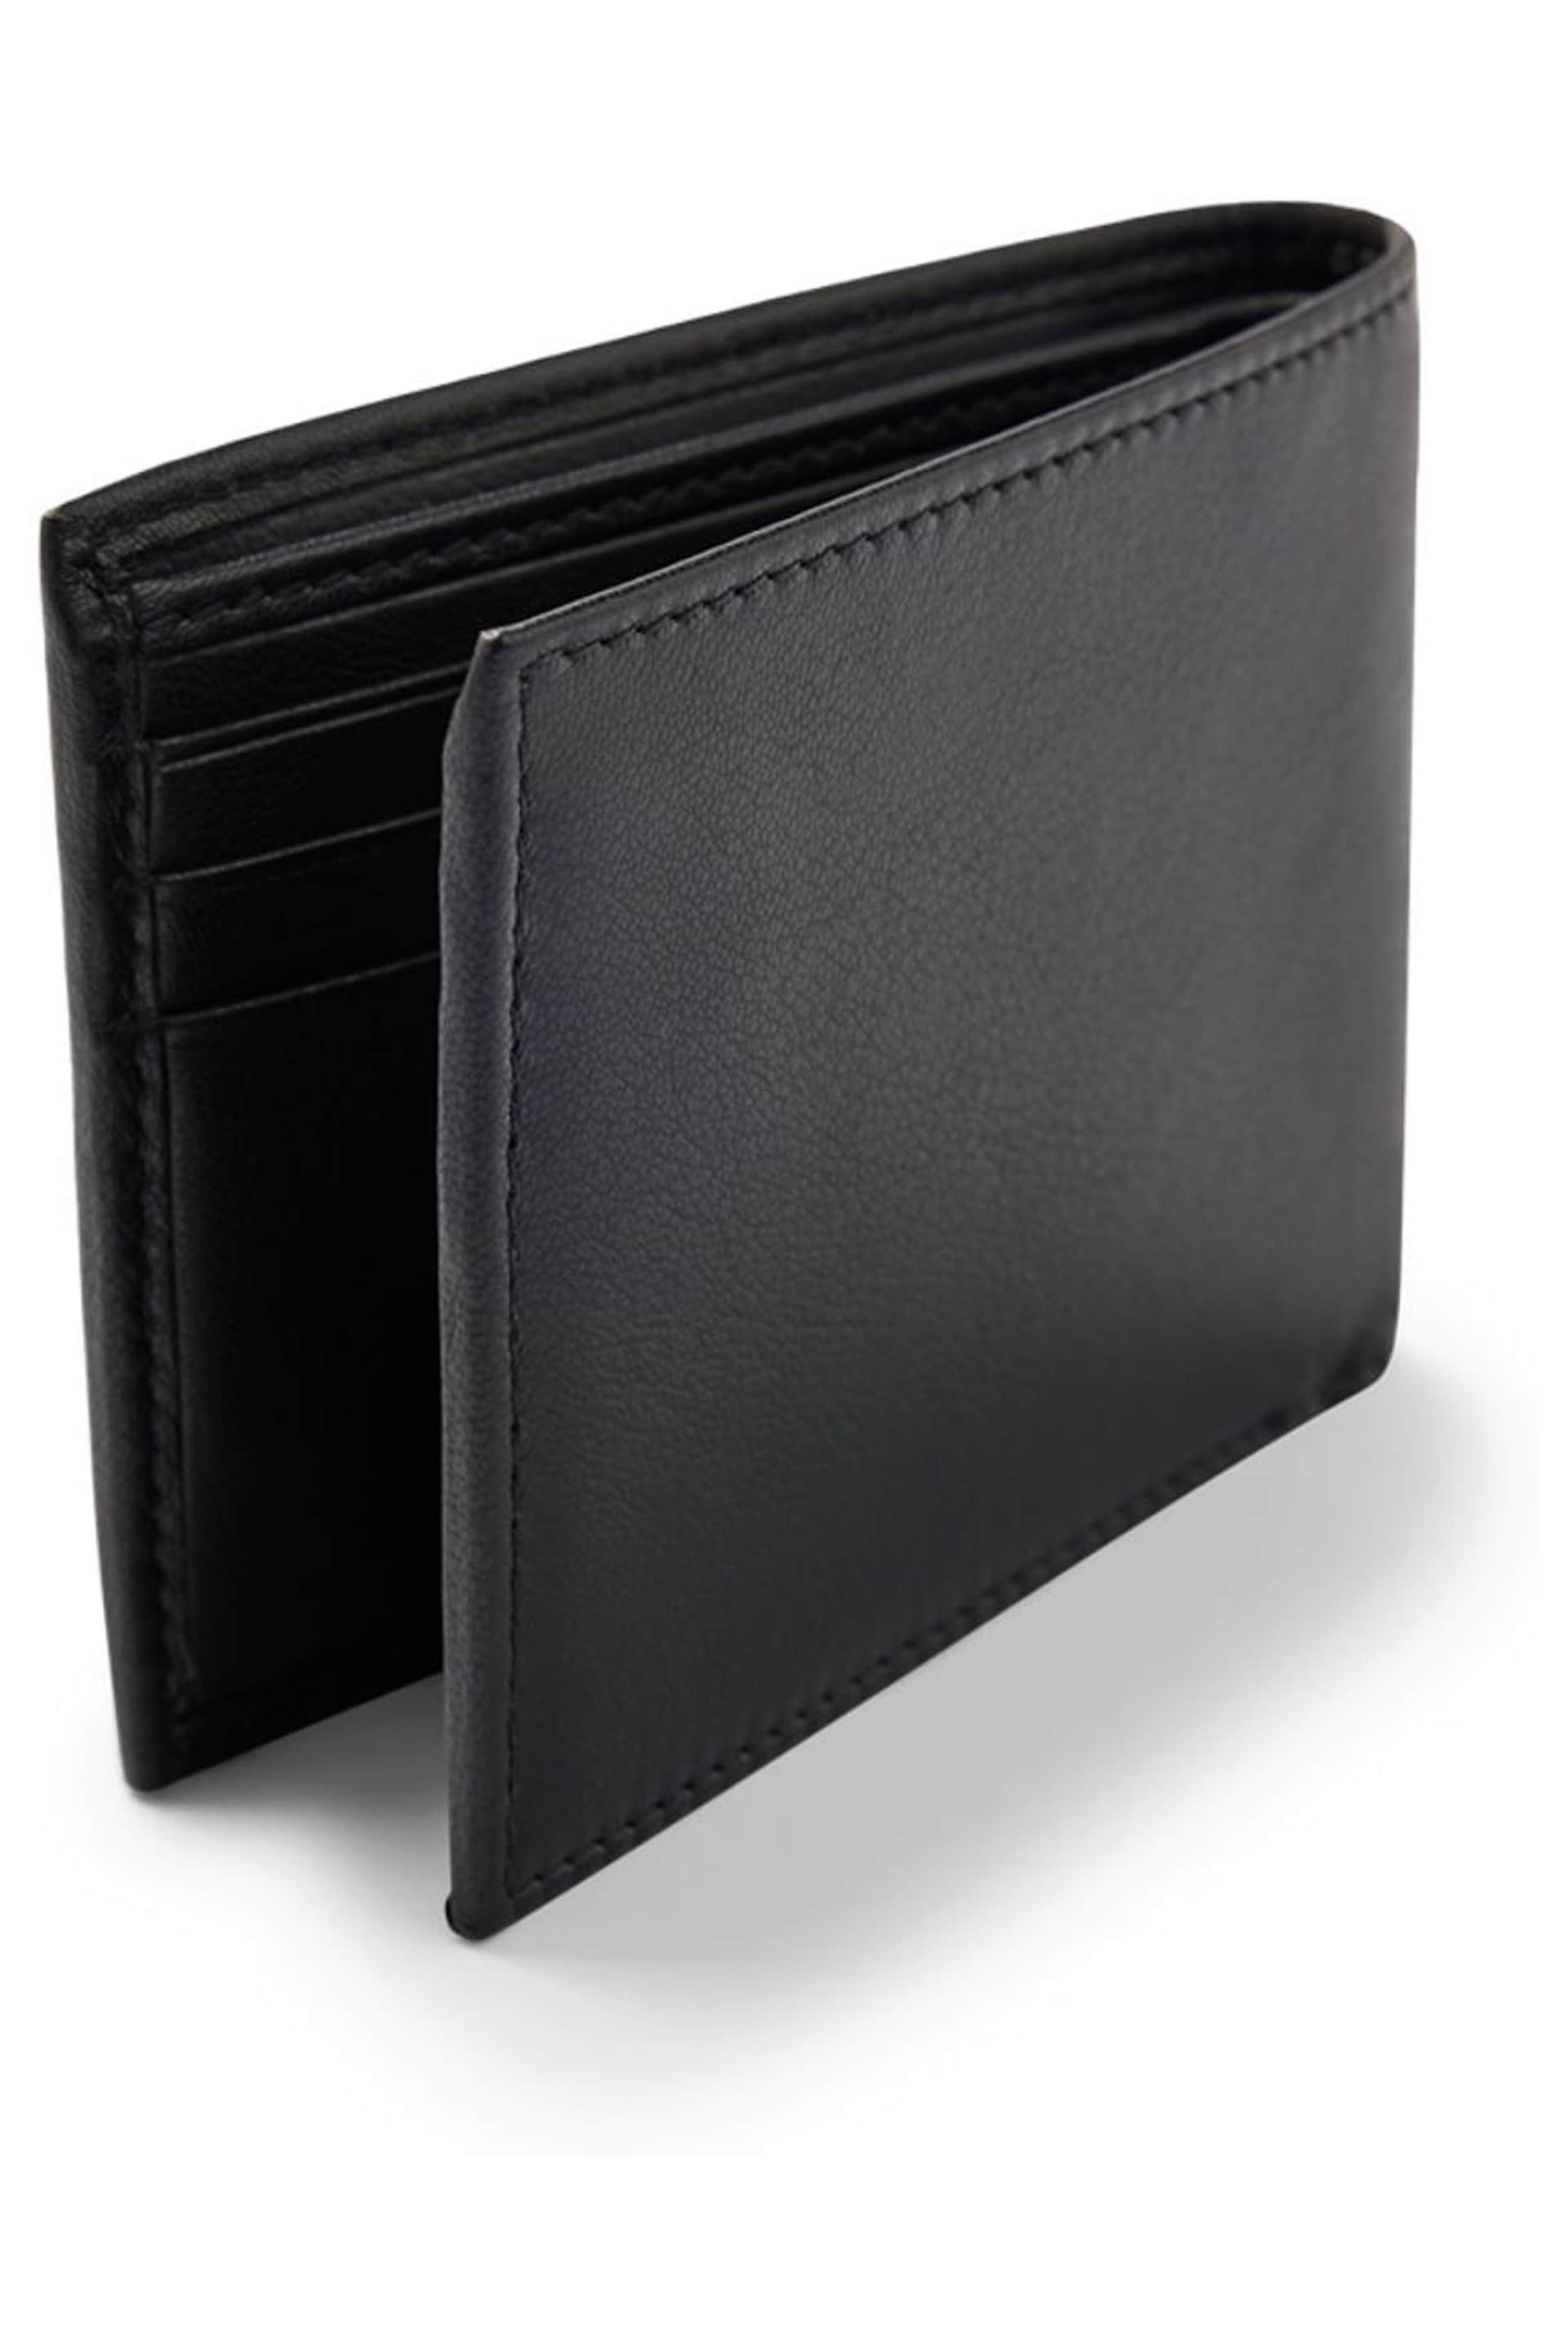 BOSS Black Embossed Logo Wallet in Grained Leather - Image 2 of 4